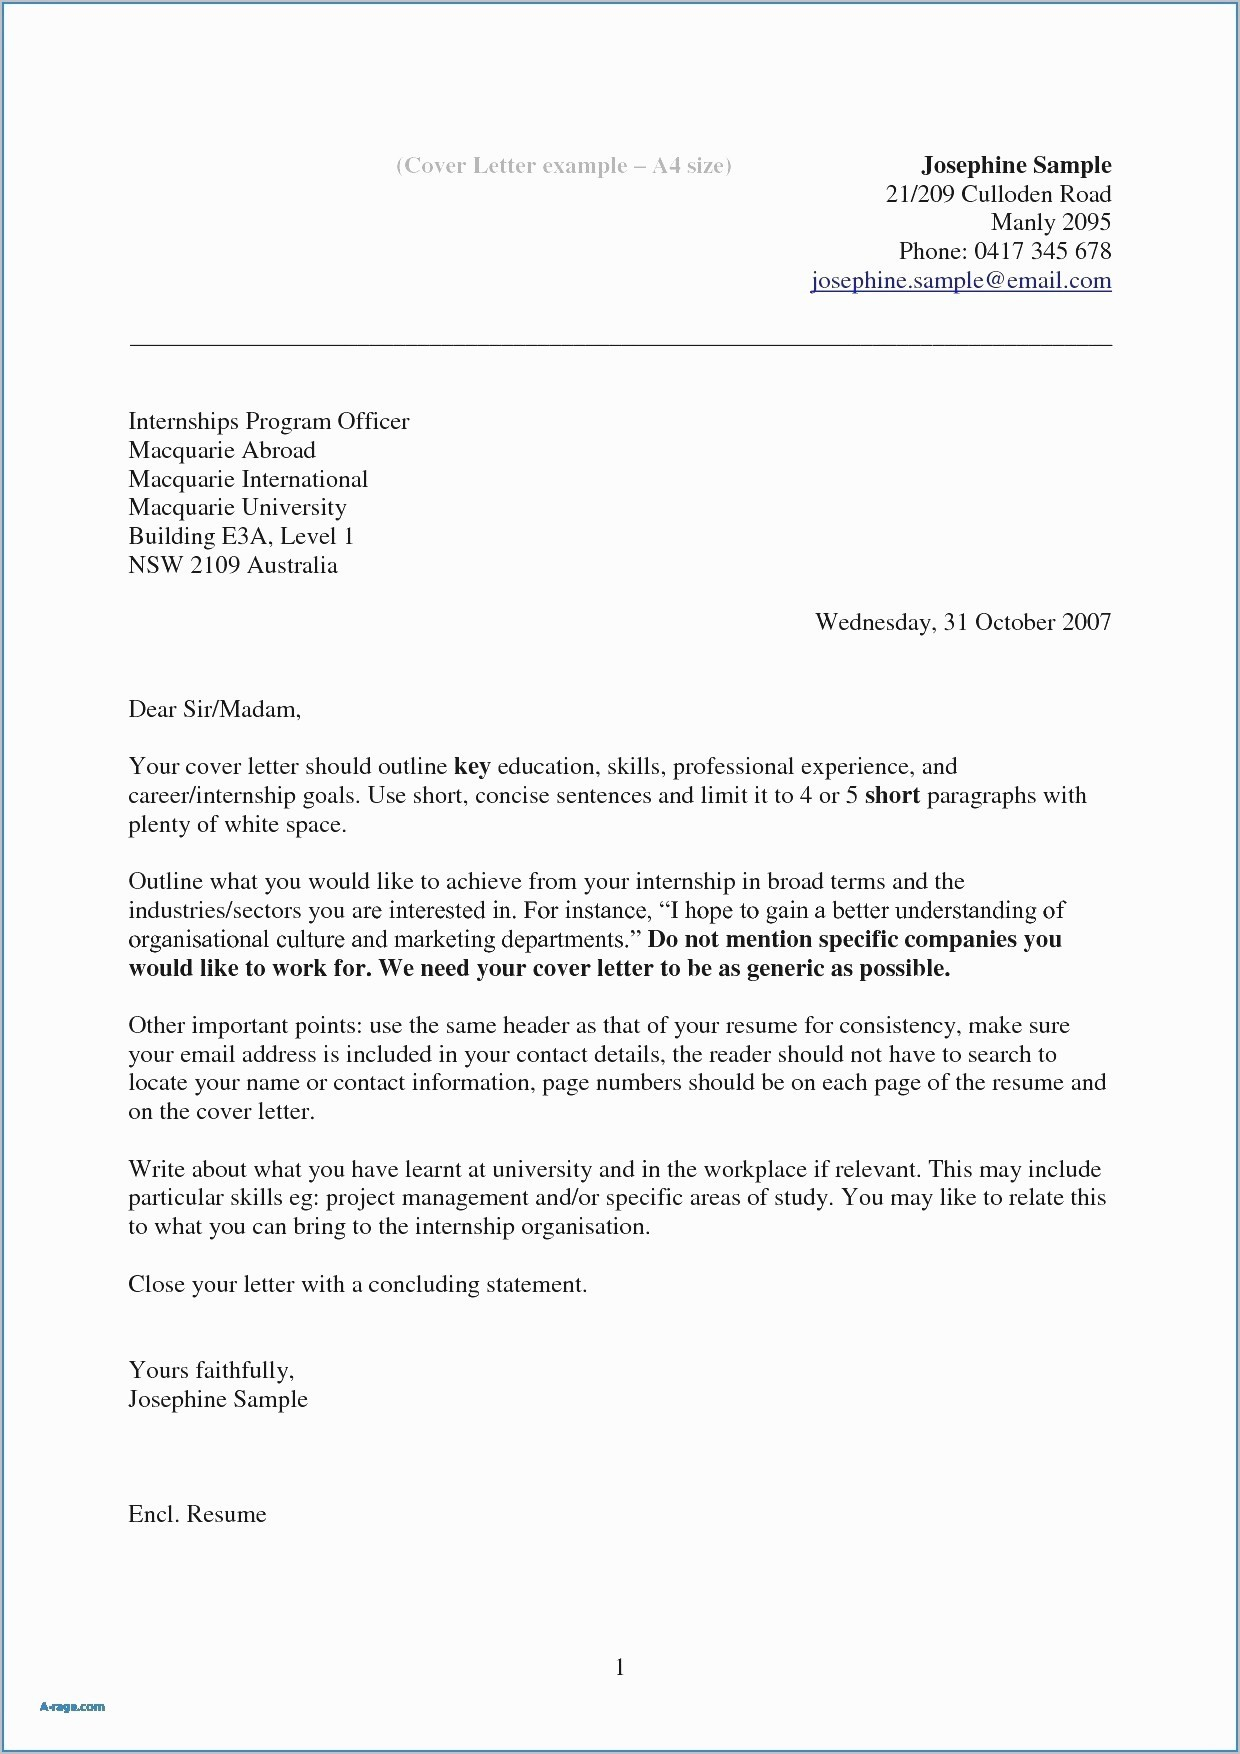 Federal Cover Letter Template - Resume Writing Panies Awesome Resume Writing Panies Lovely Email